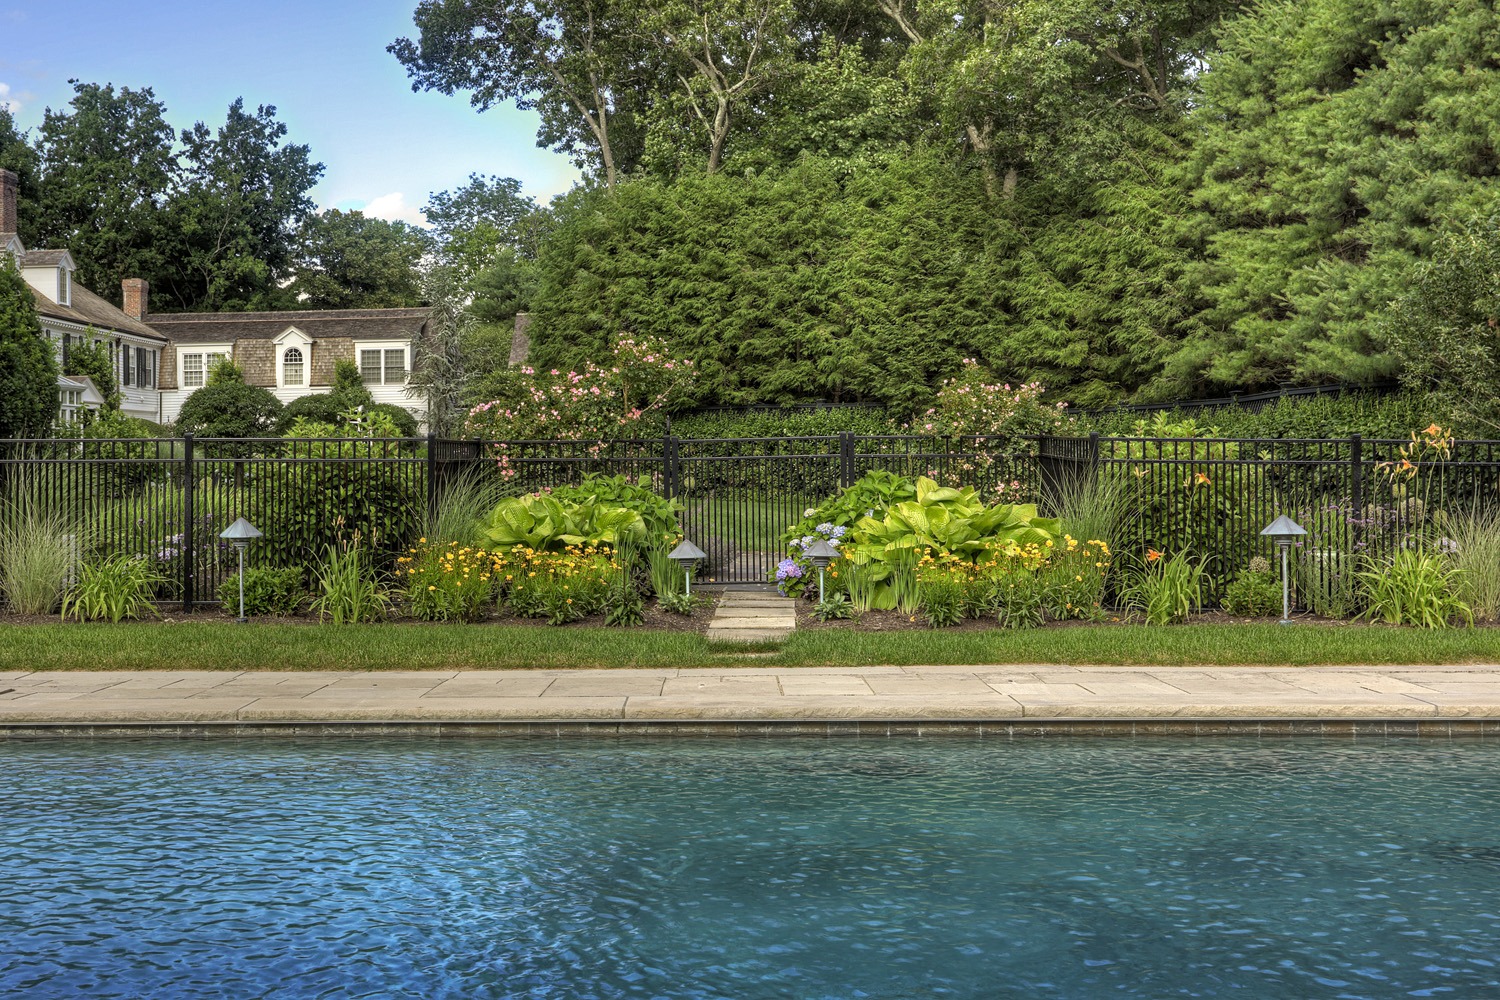 An inviting outdoor swimming pool with crystal clear water bordered by a well-manicured lawn, vibrant flowering plants, and an elegant wrought-iron fence.